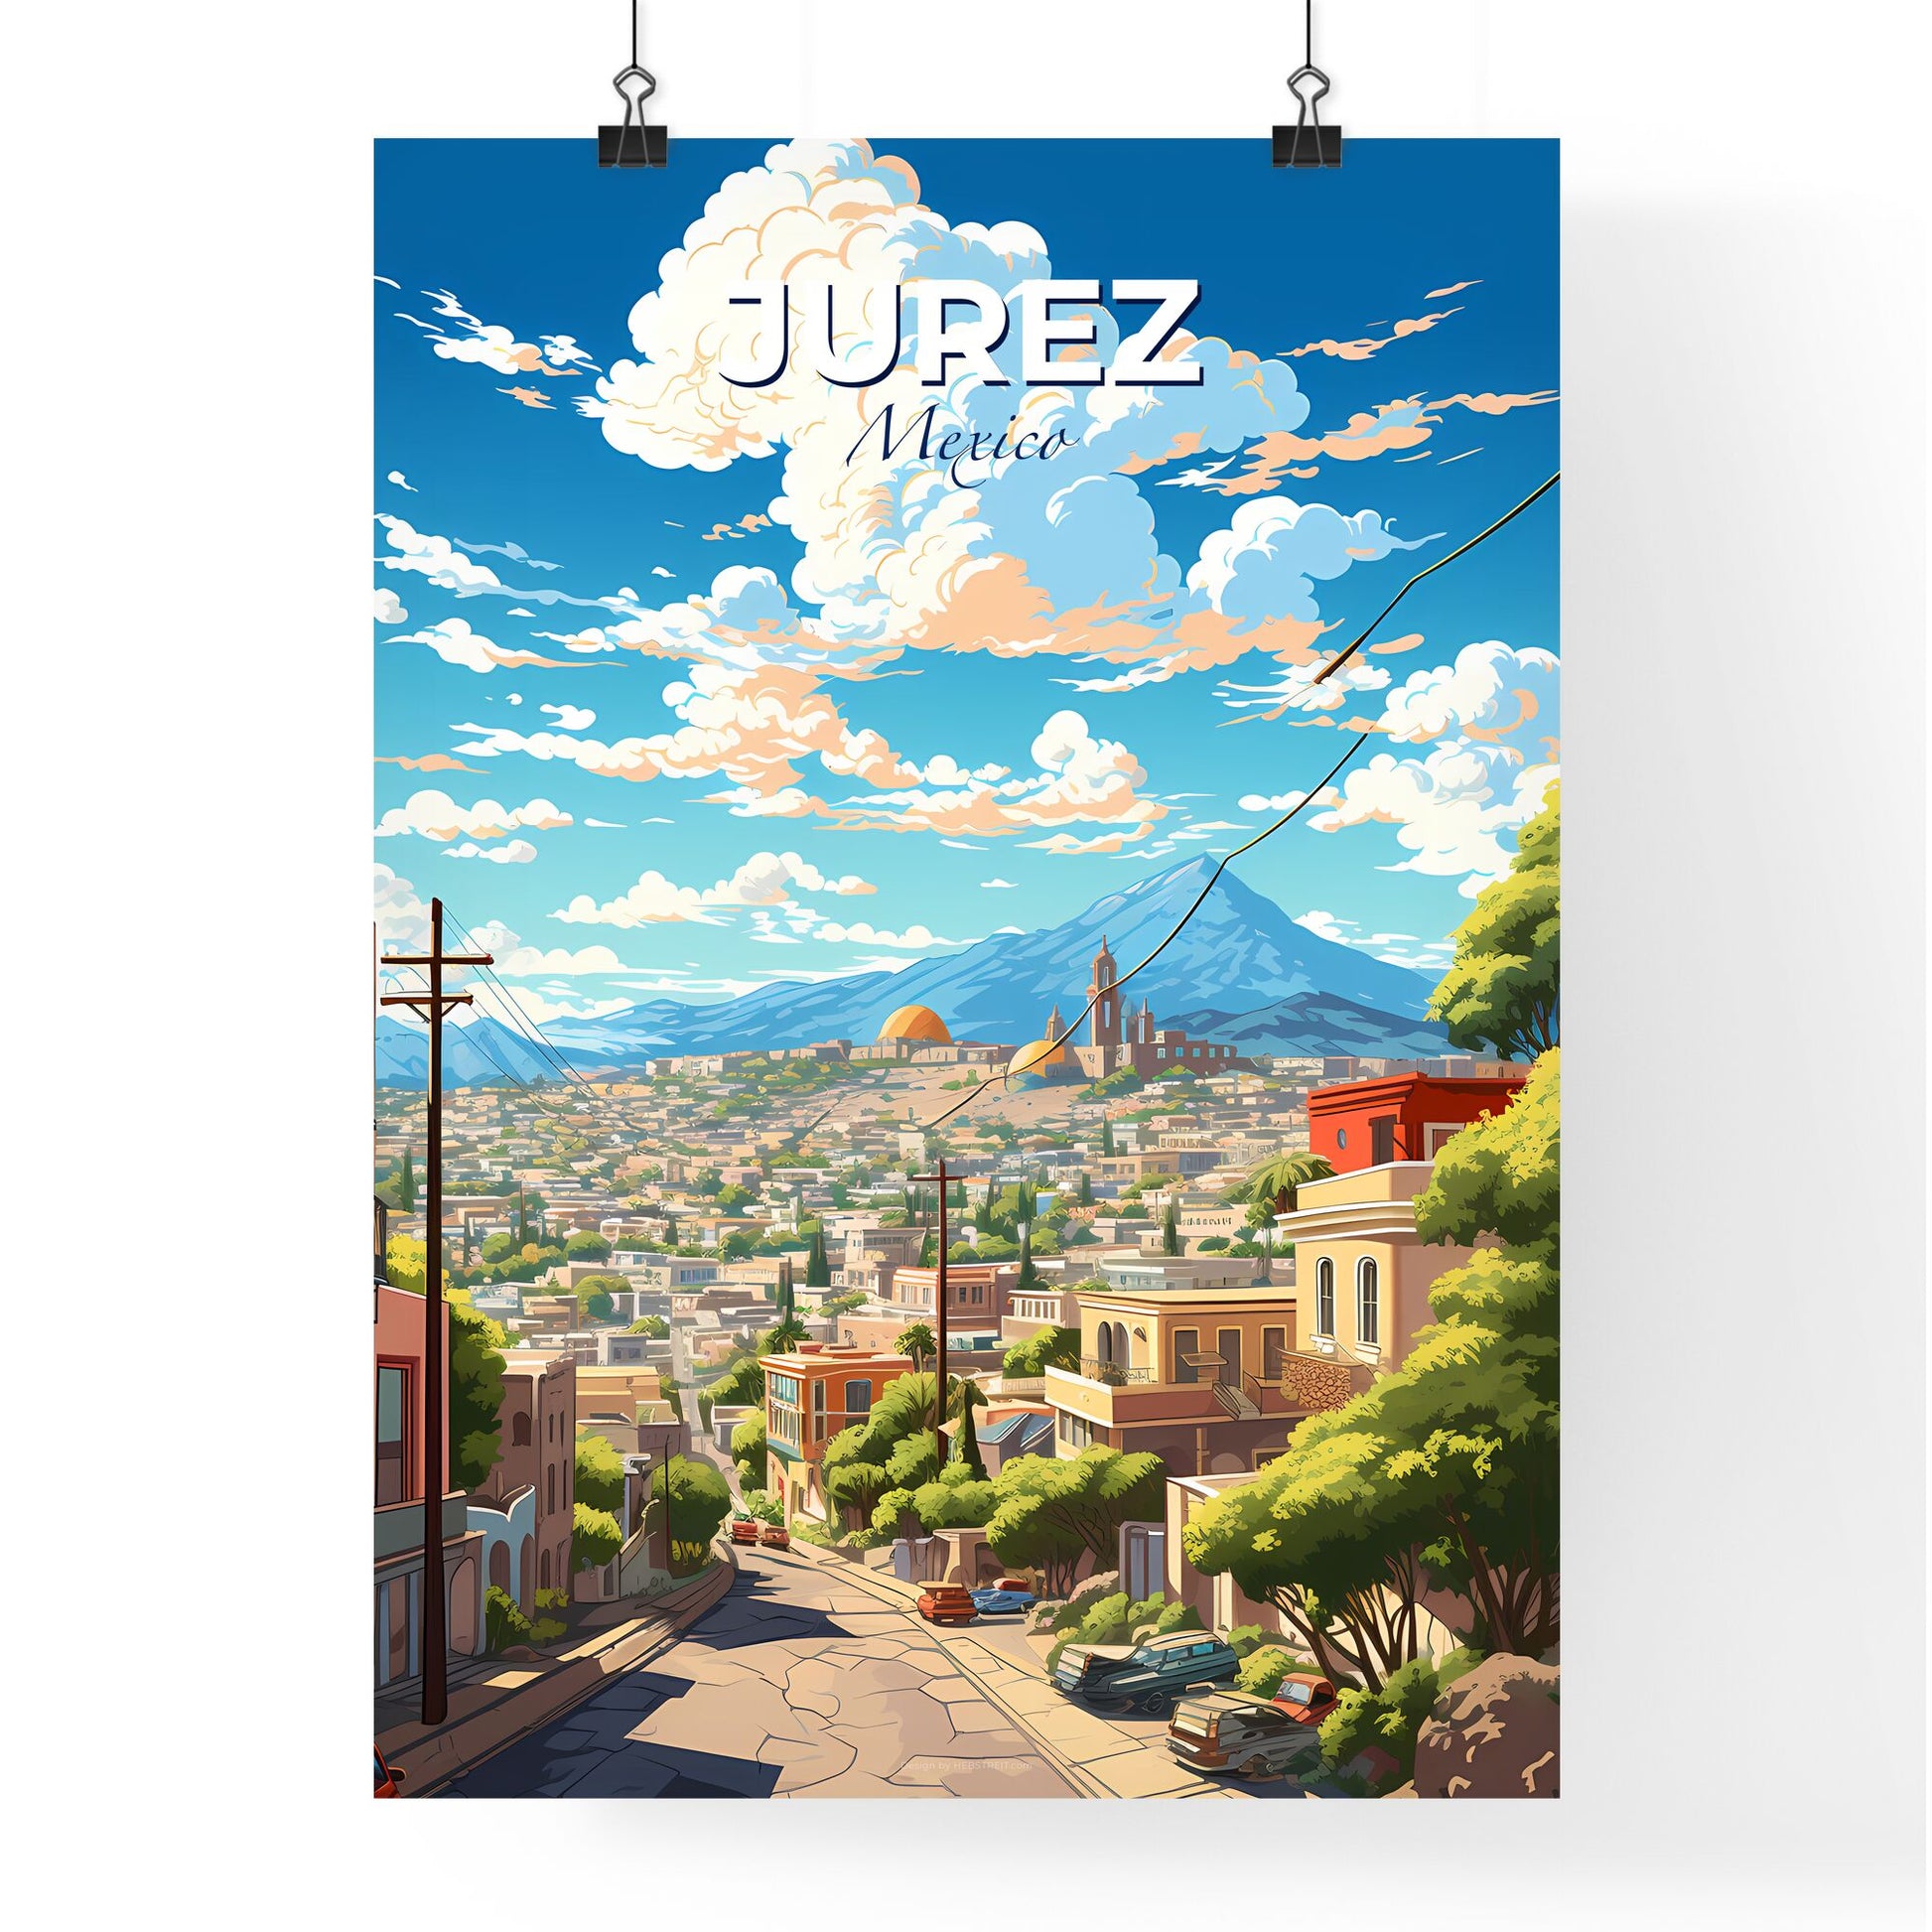 Jurez Mexico Skyline - A City With Trees And Mountains In The Background - Customizable Travel Gift Default Title